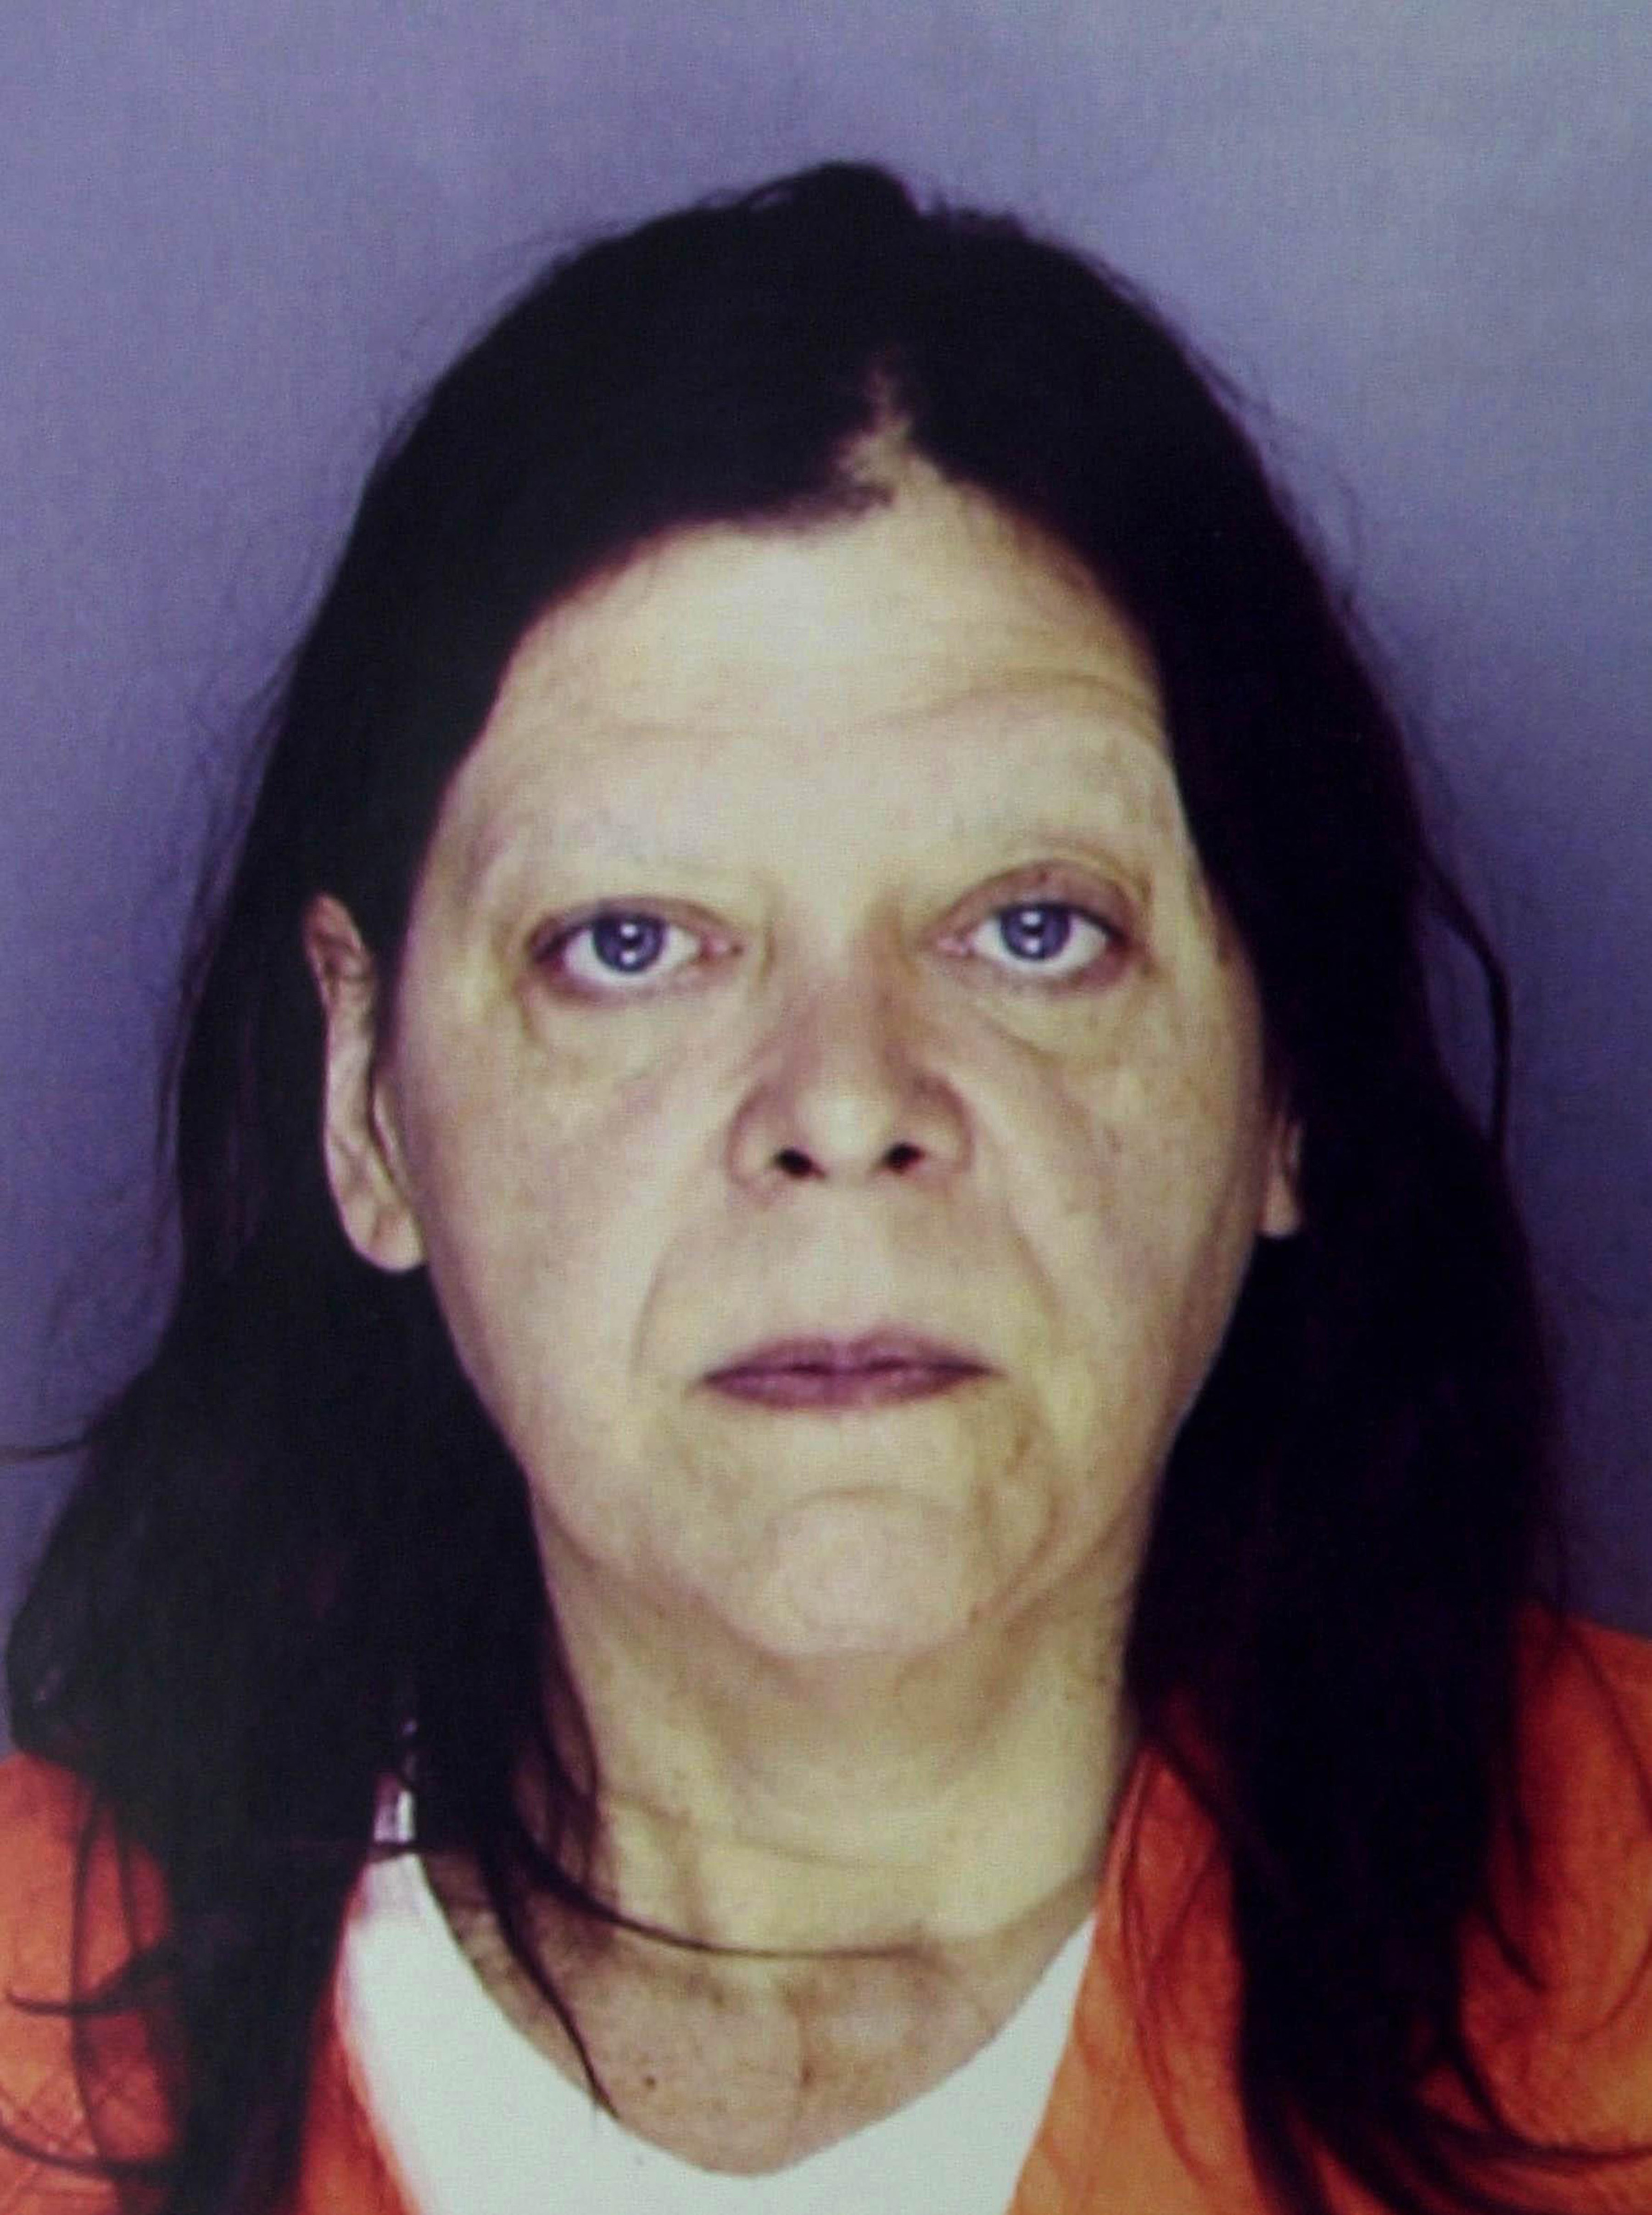 Marjorie Diehl-Armstrong was being sentenced to life in prison and died in 2017